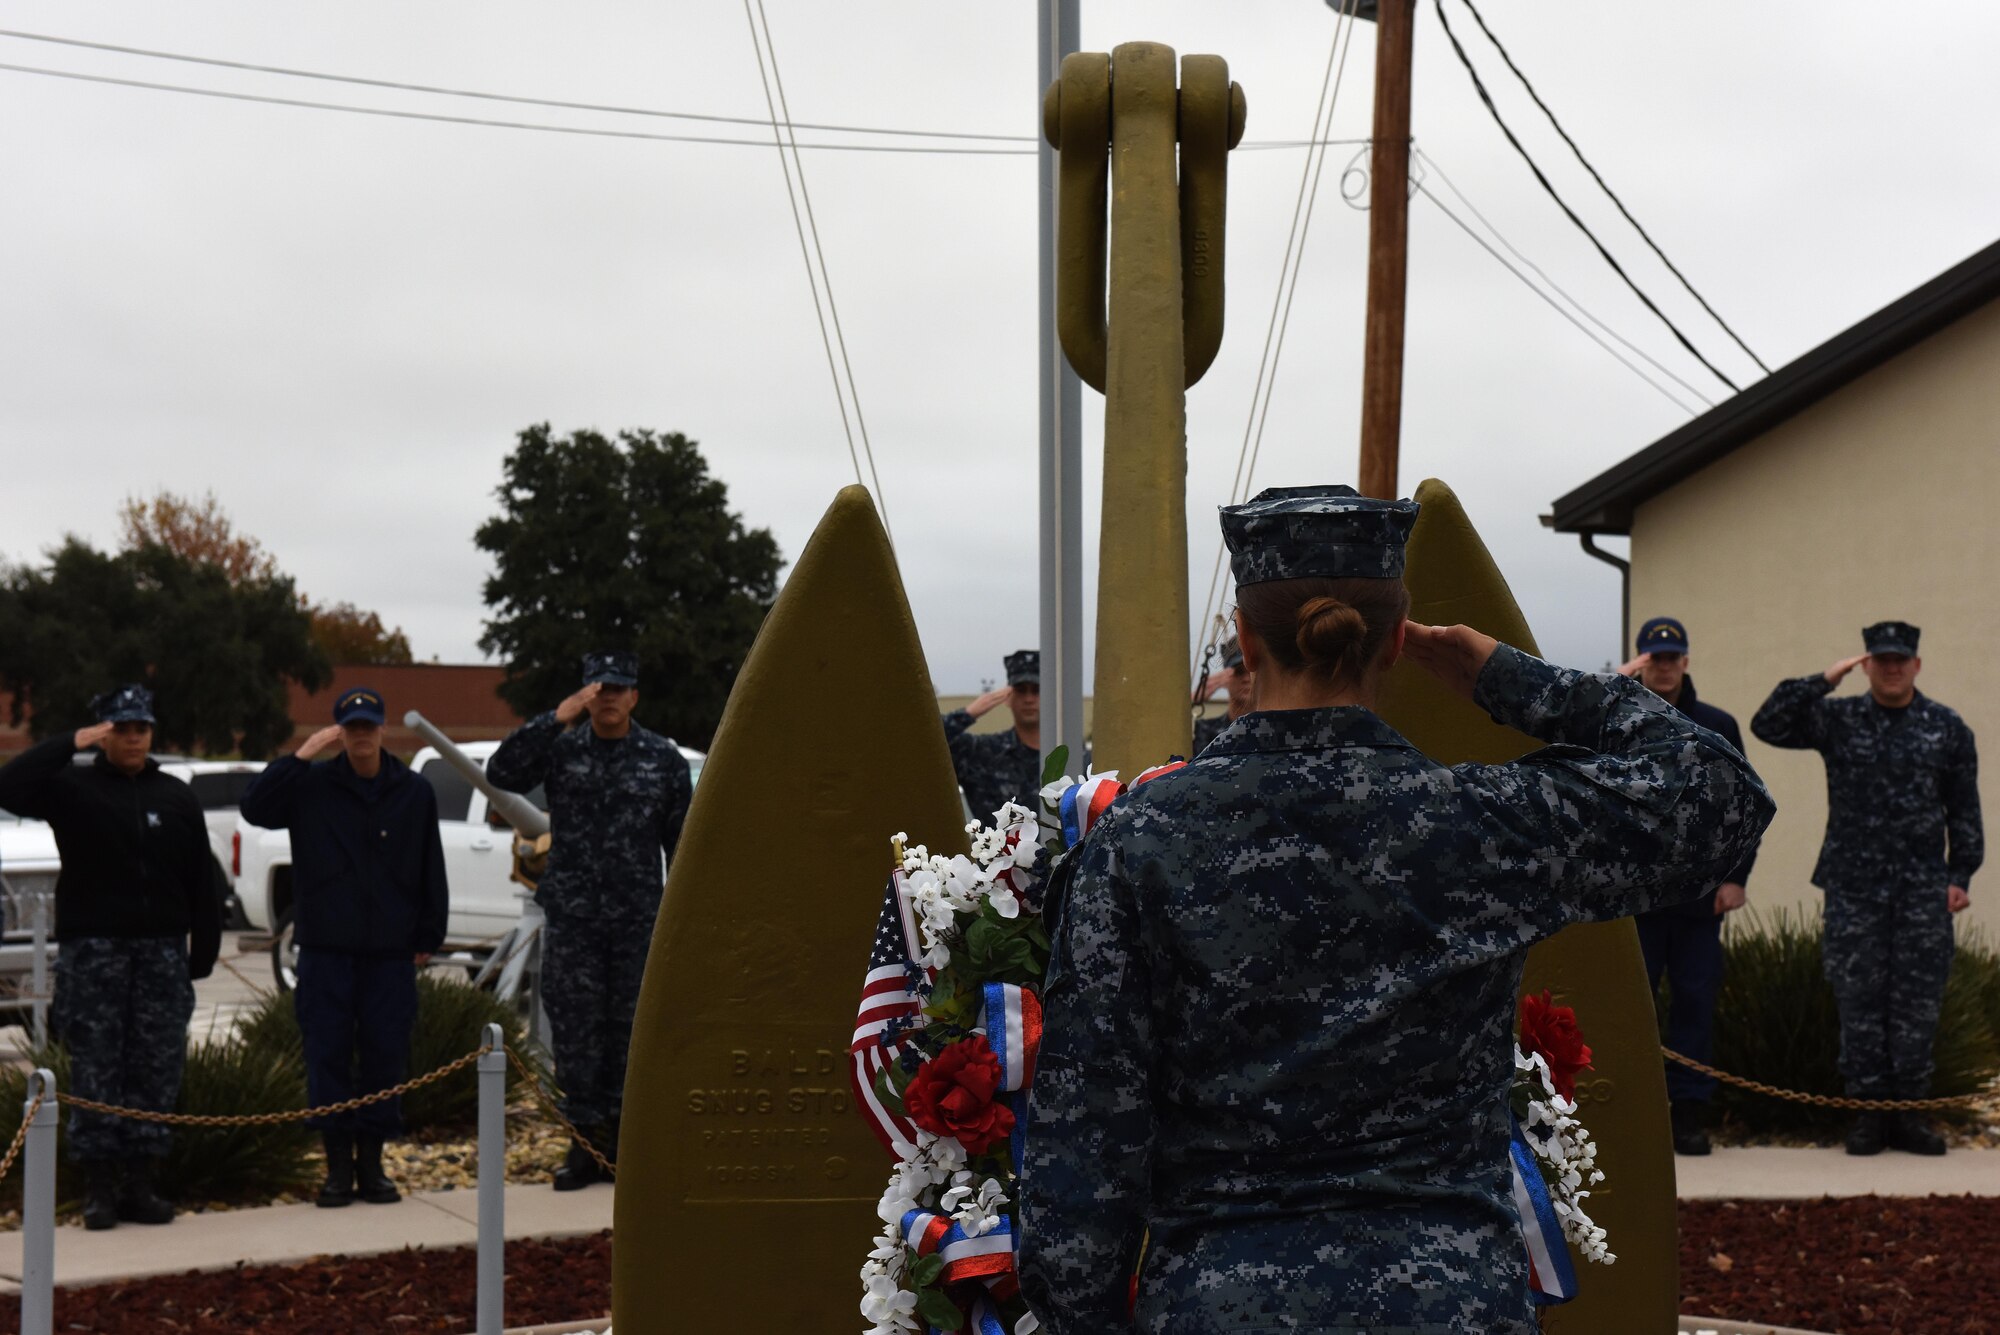 U.S. Navy sailors salute a memorial wreath during Taps for the 75th Pearl Harbor remembrance ceremony at Liberty Park on Goodfellow Air Force Base, Texas, Dec. 7, 2016. The wreath was placed out in the open for base members to observe. (U.S. Air Force photo by Airman 1st Class Caelynn Ferguson/Released)